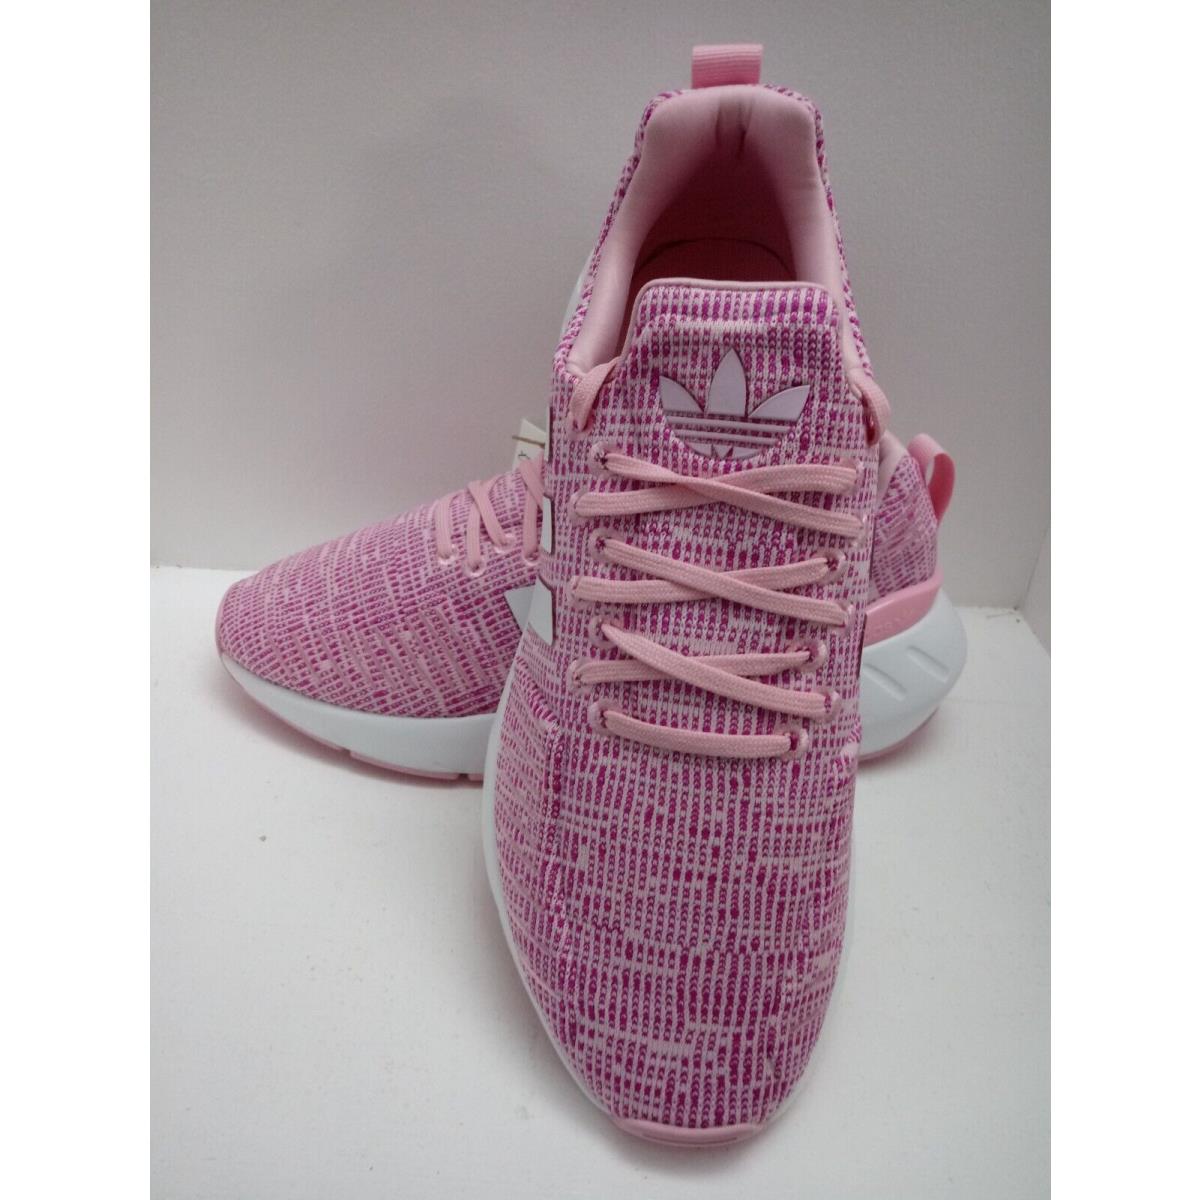 Adidas shoes  - PINK/WHITE 10